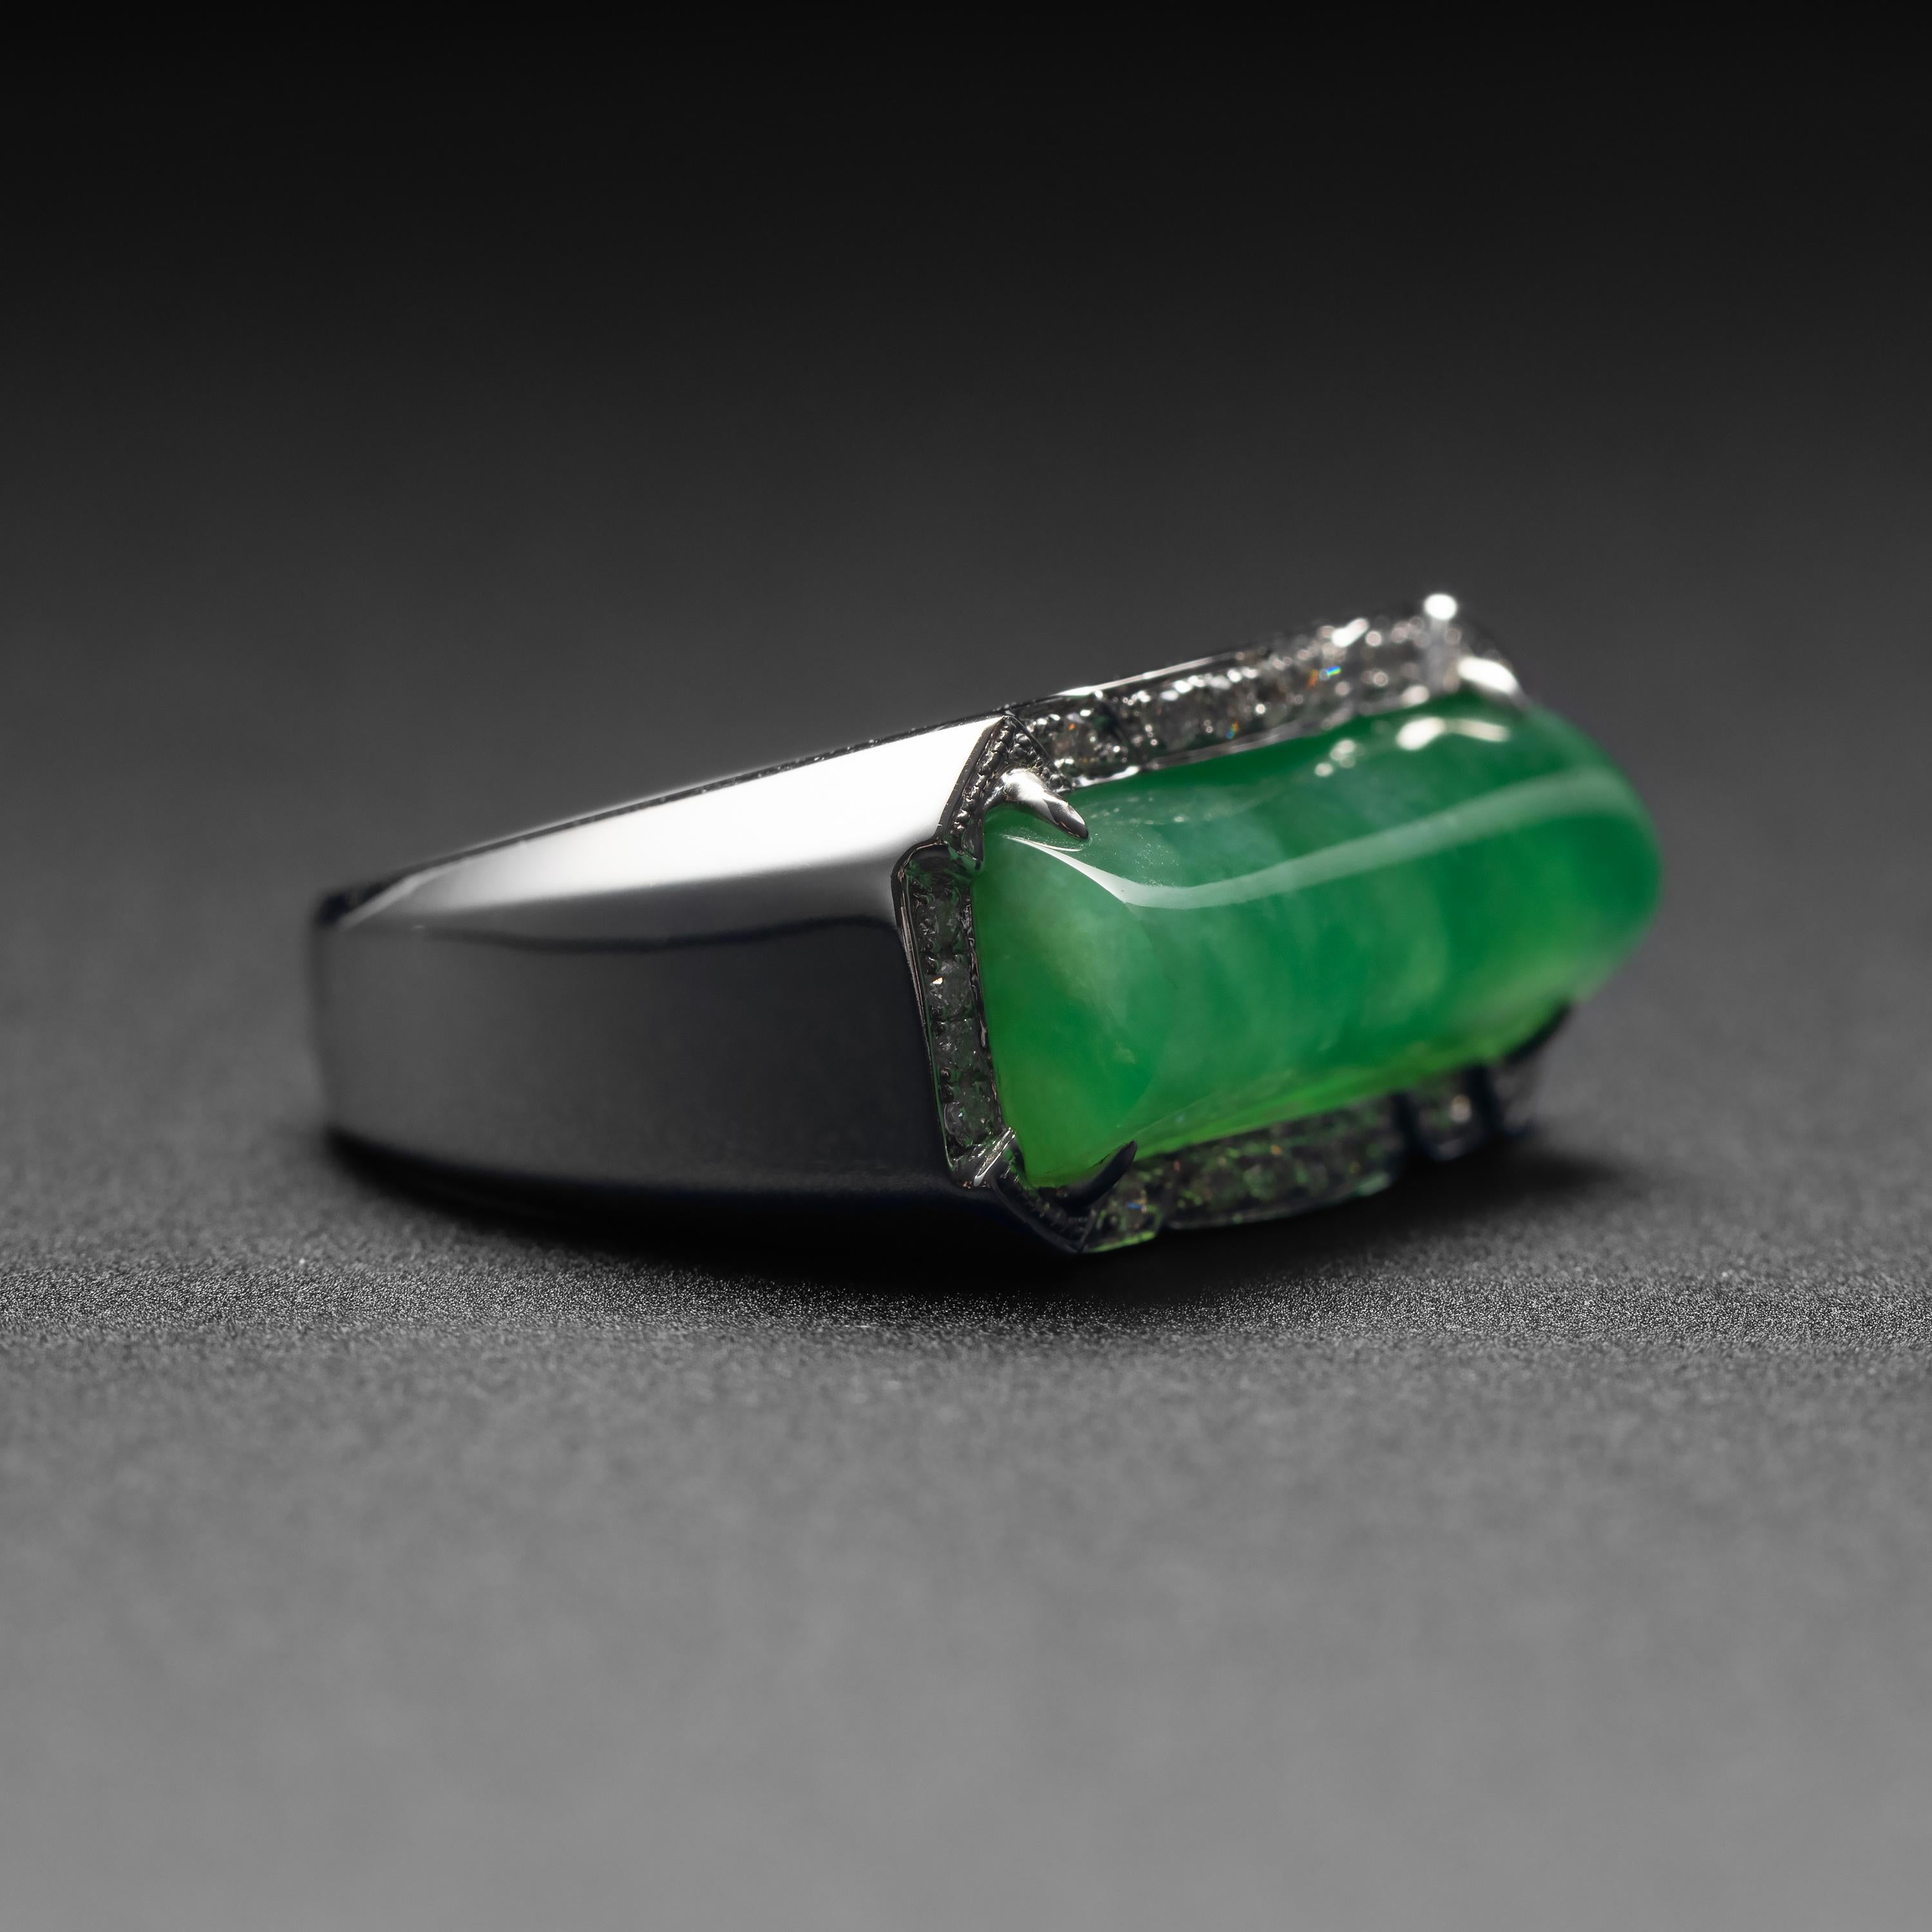 Contemporary Men's Jade Ring with Diamonds Certified Untreated